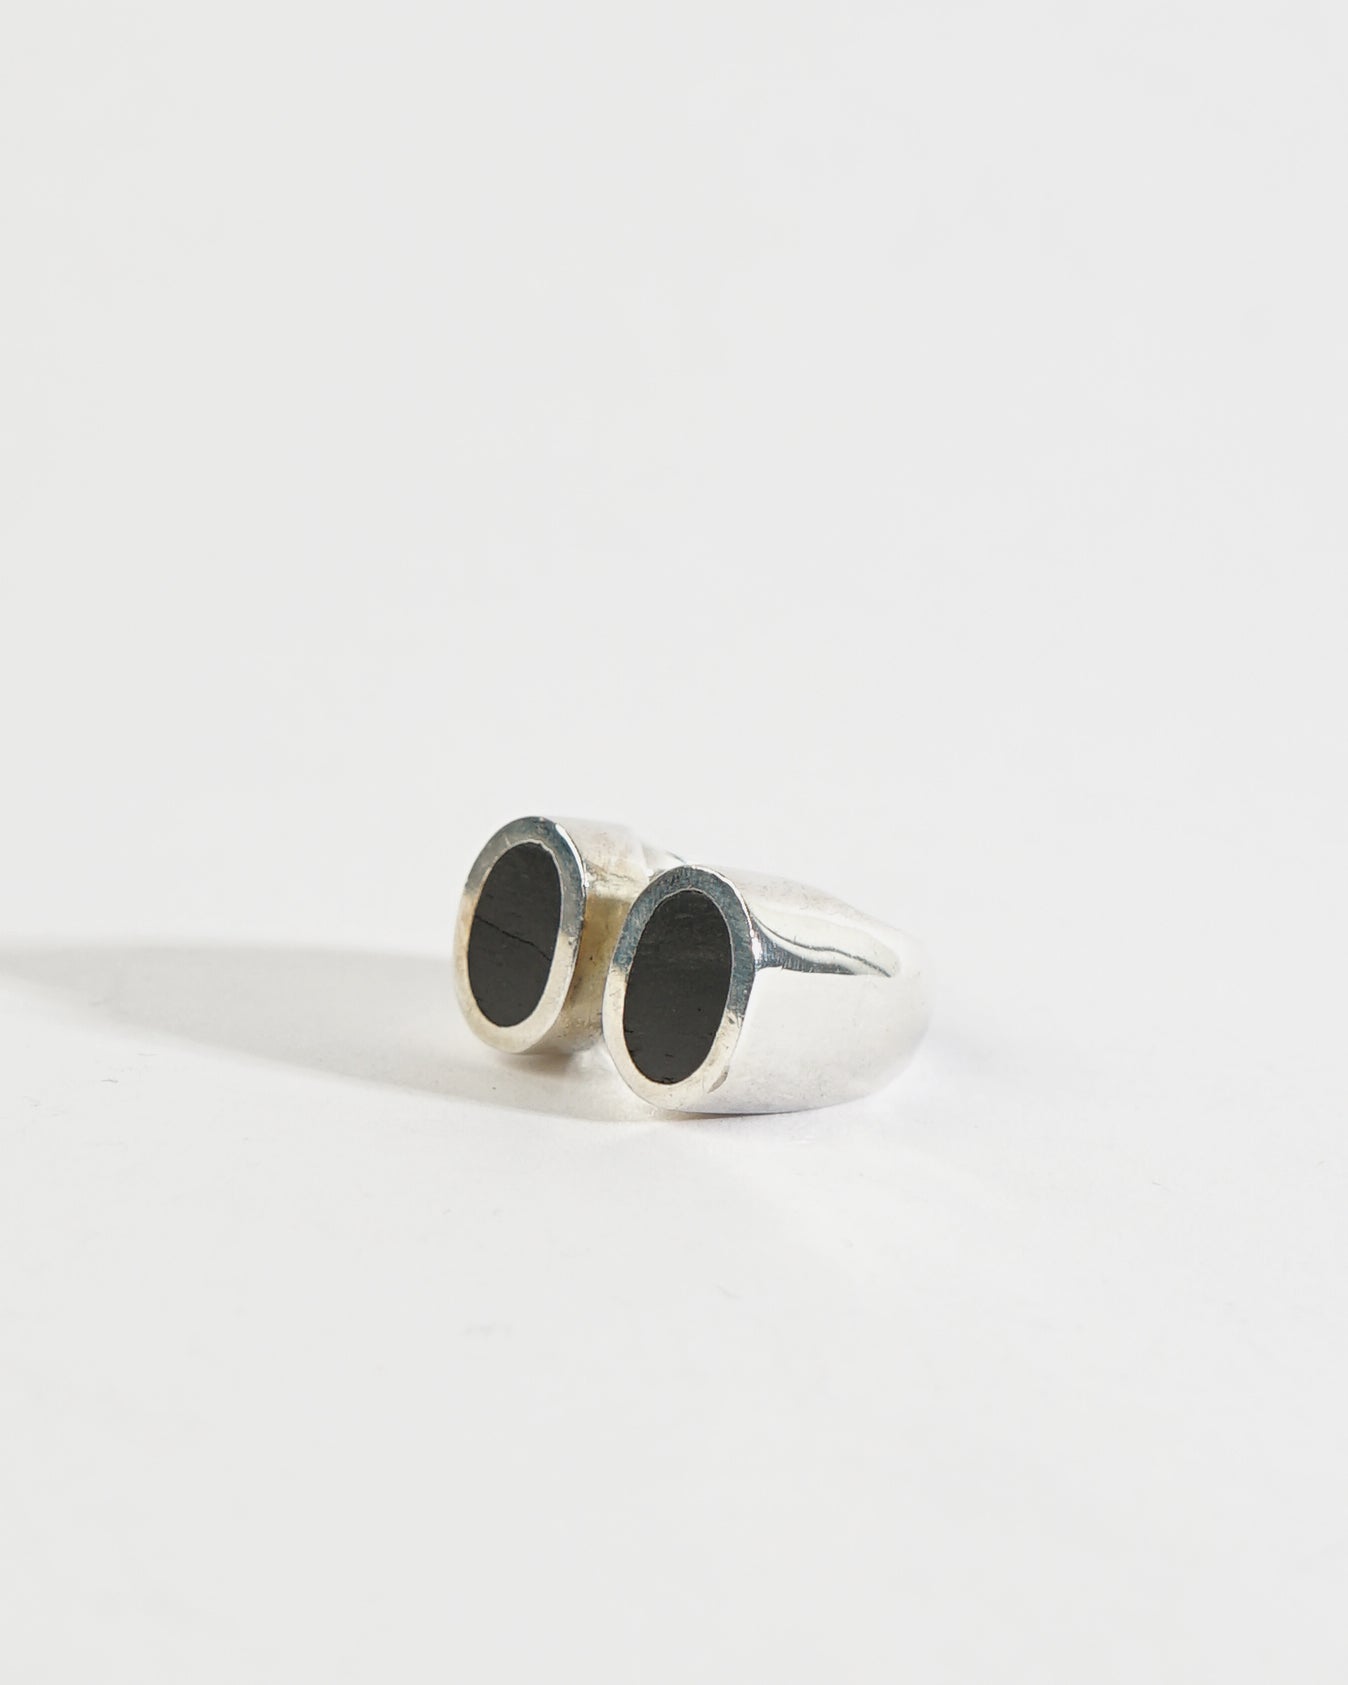 Silver x Wood Ring / size: 6.5